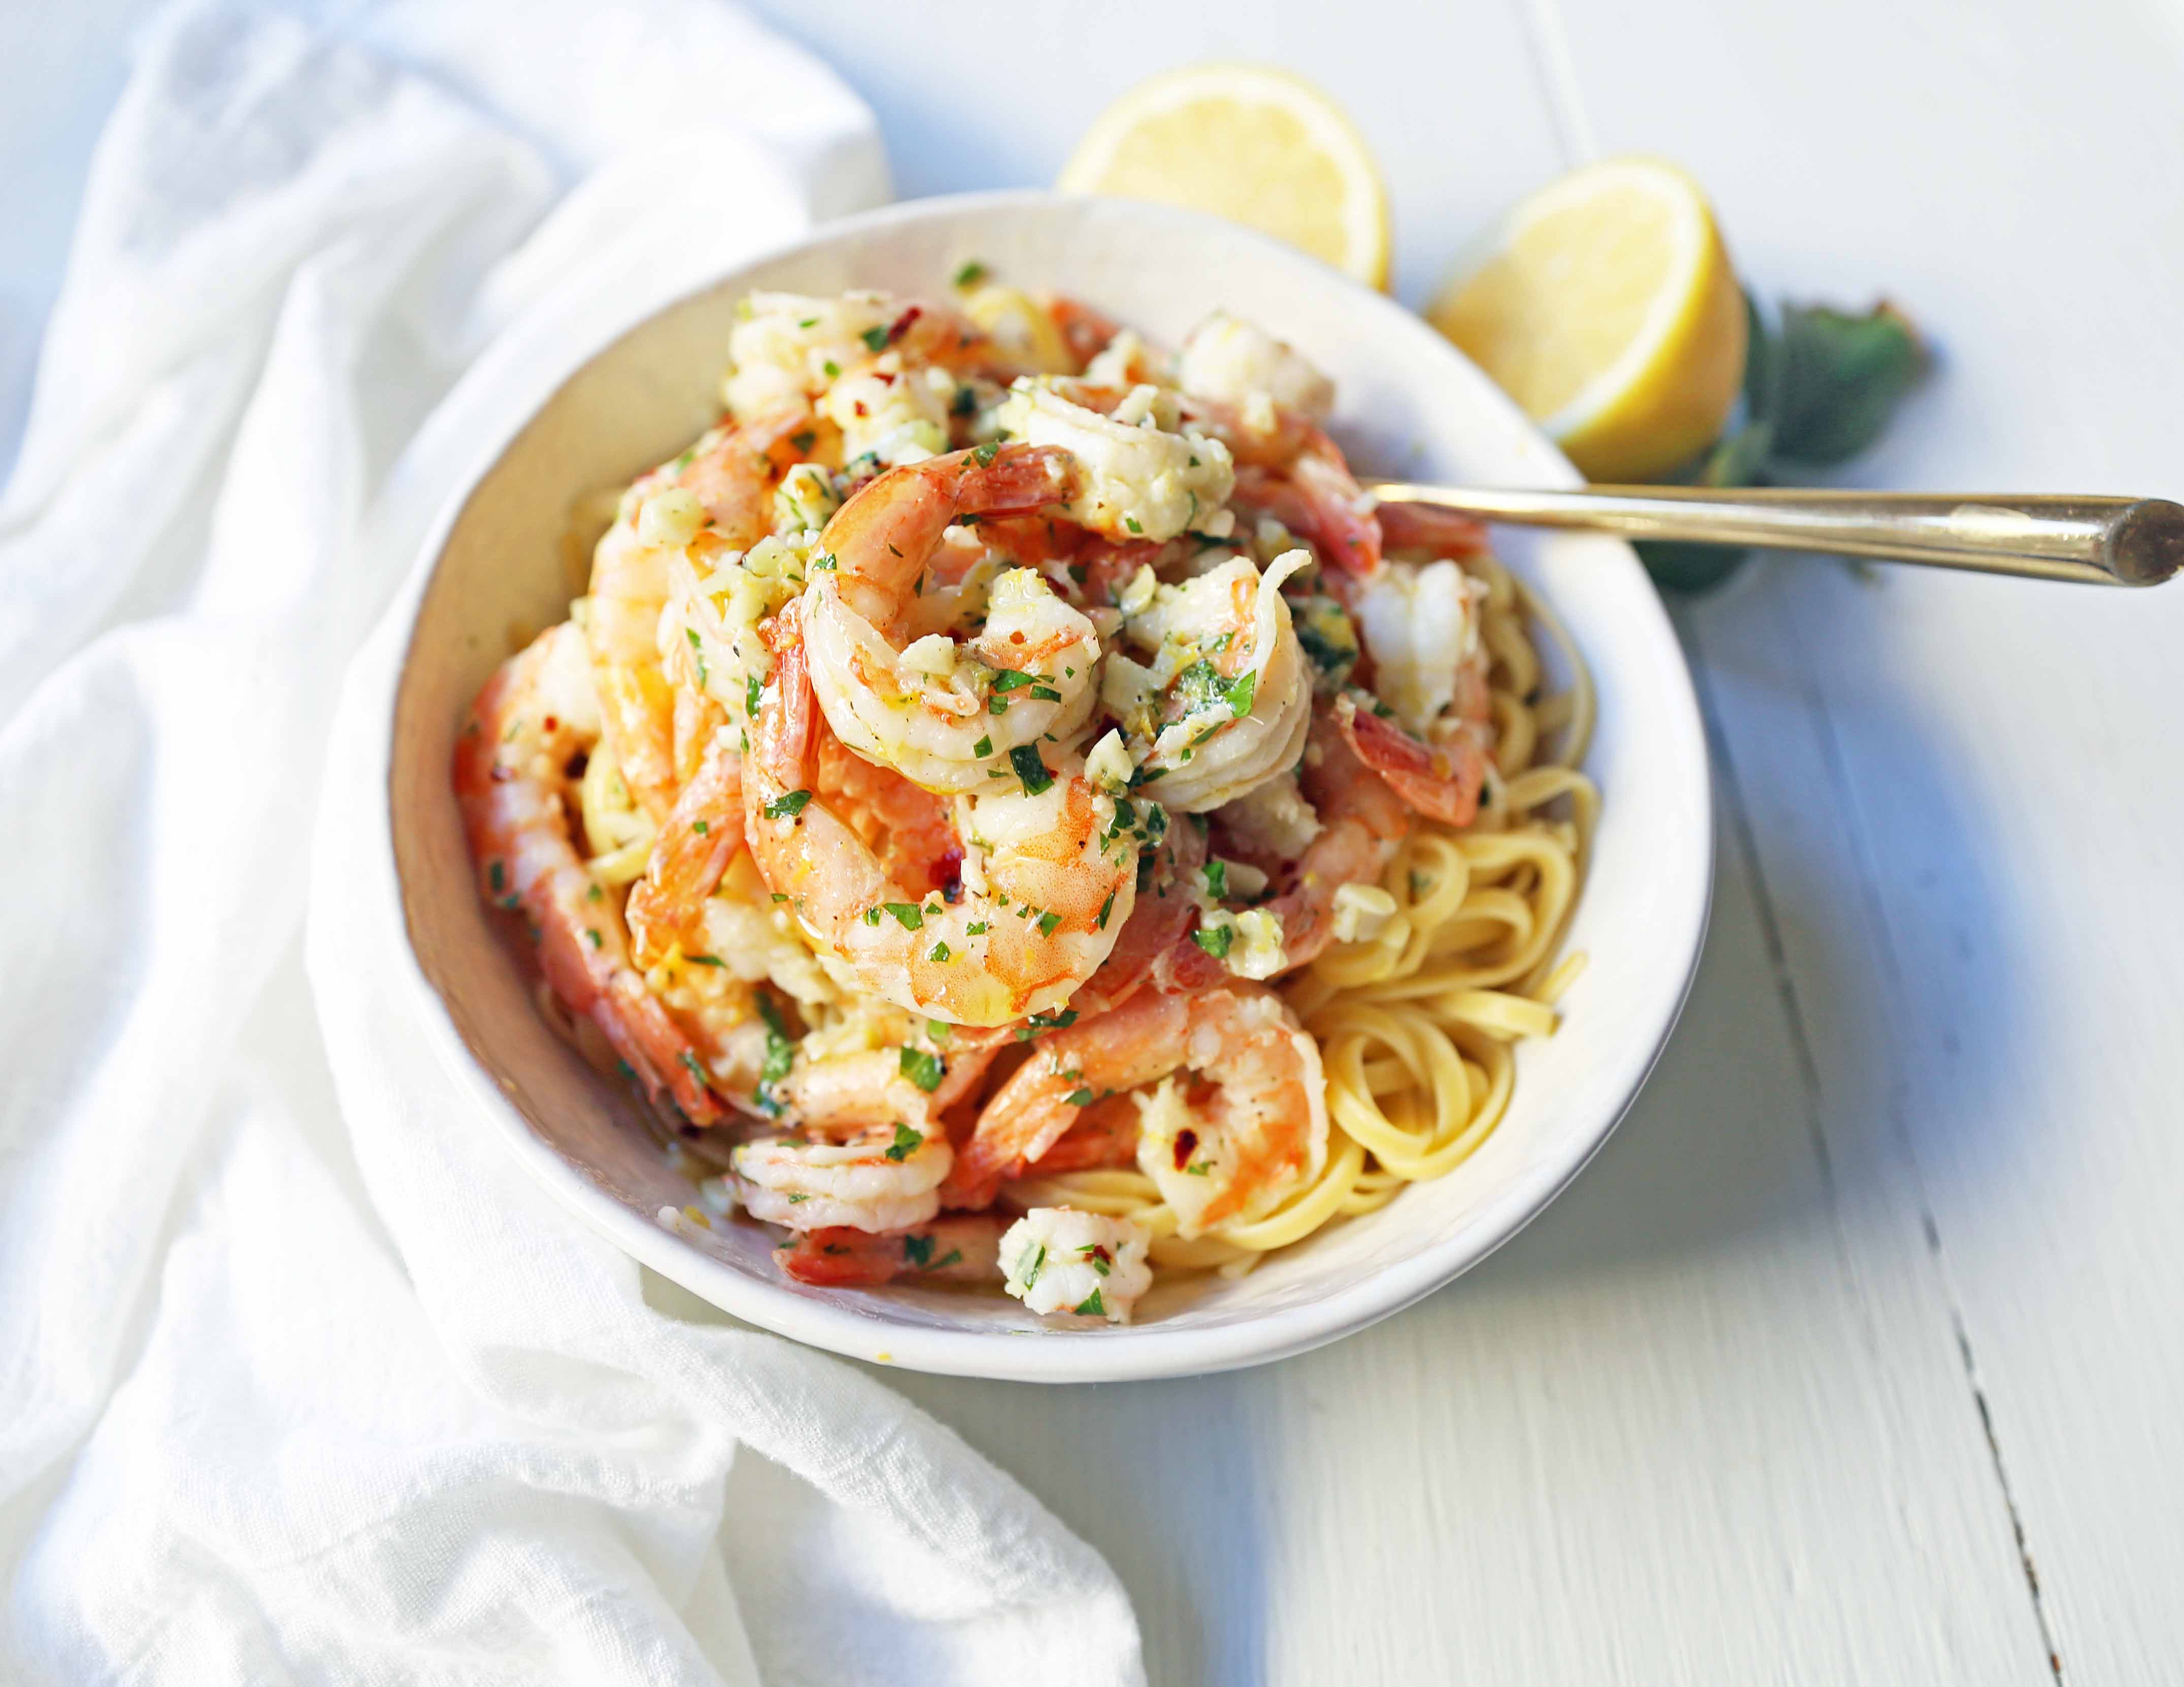 Shrimp Scampi Linguine. Shrimp sauteed in a lemon garlic butter sauce tossed with linguine pasta and made in less than 20 minutes. www.modernhoney.com #shrimp #shrimpscampi #shrimpscampilinguine #pasta #valentinesday